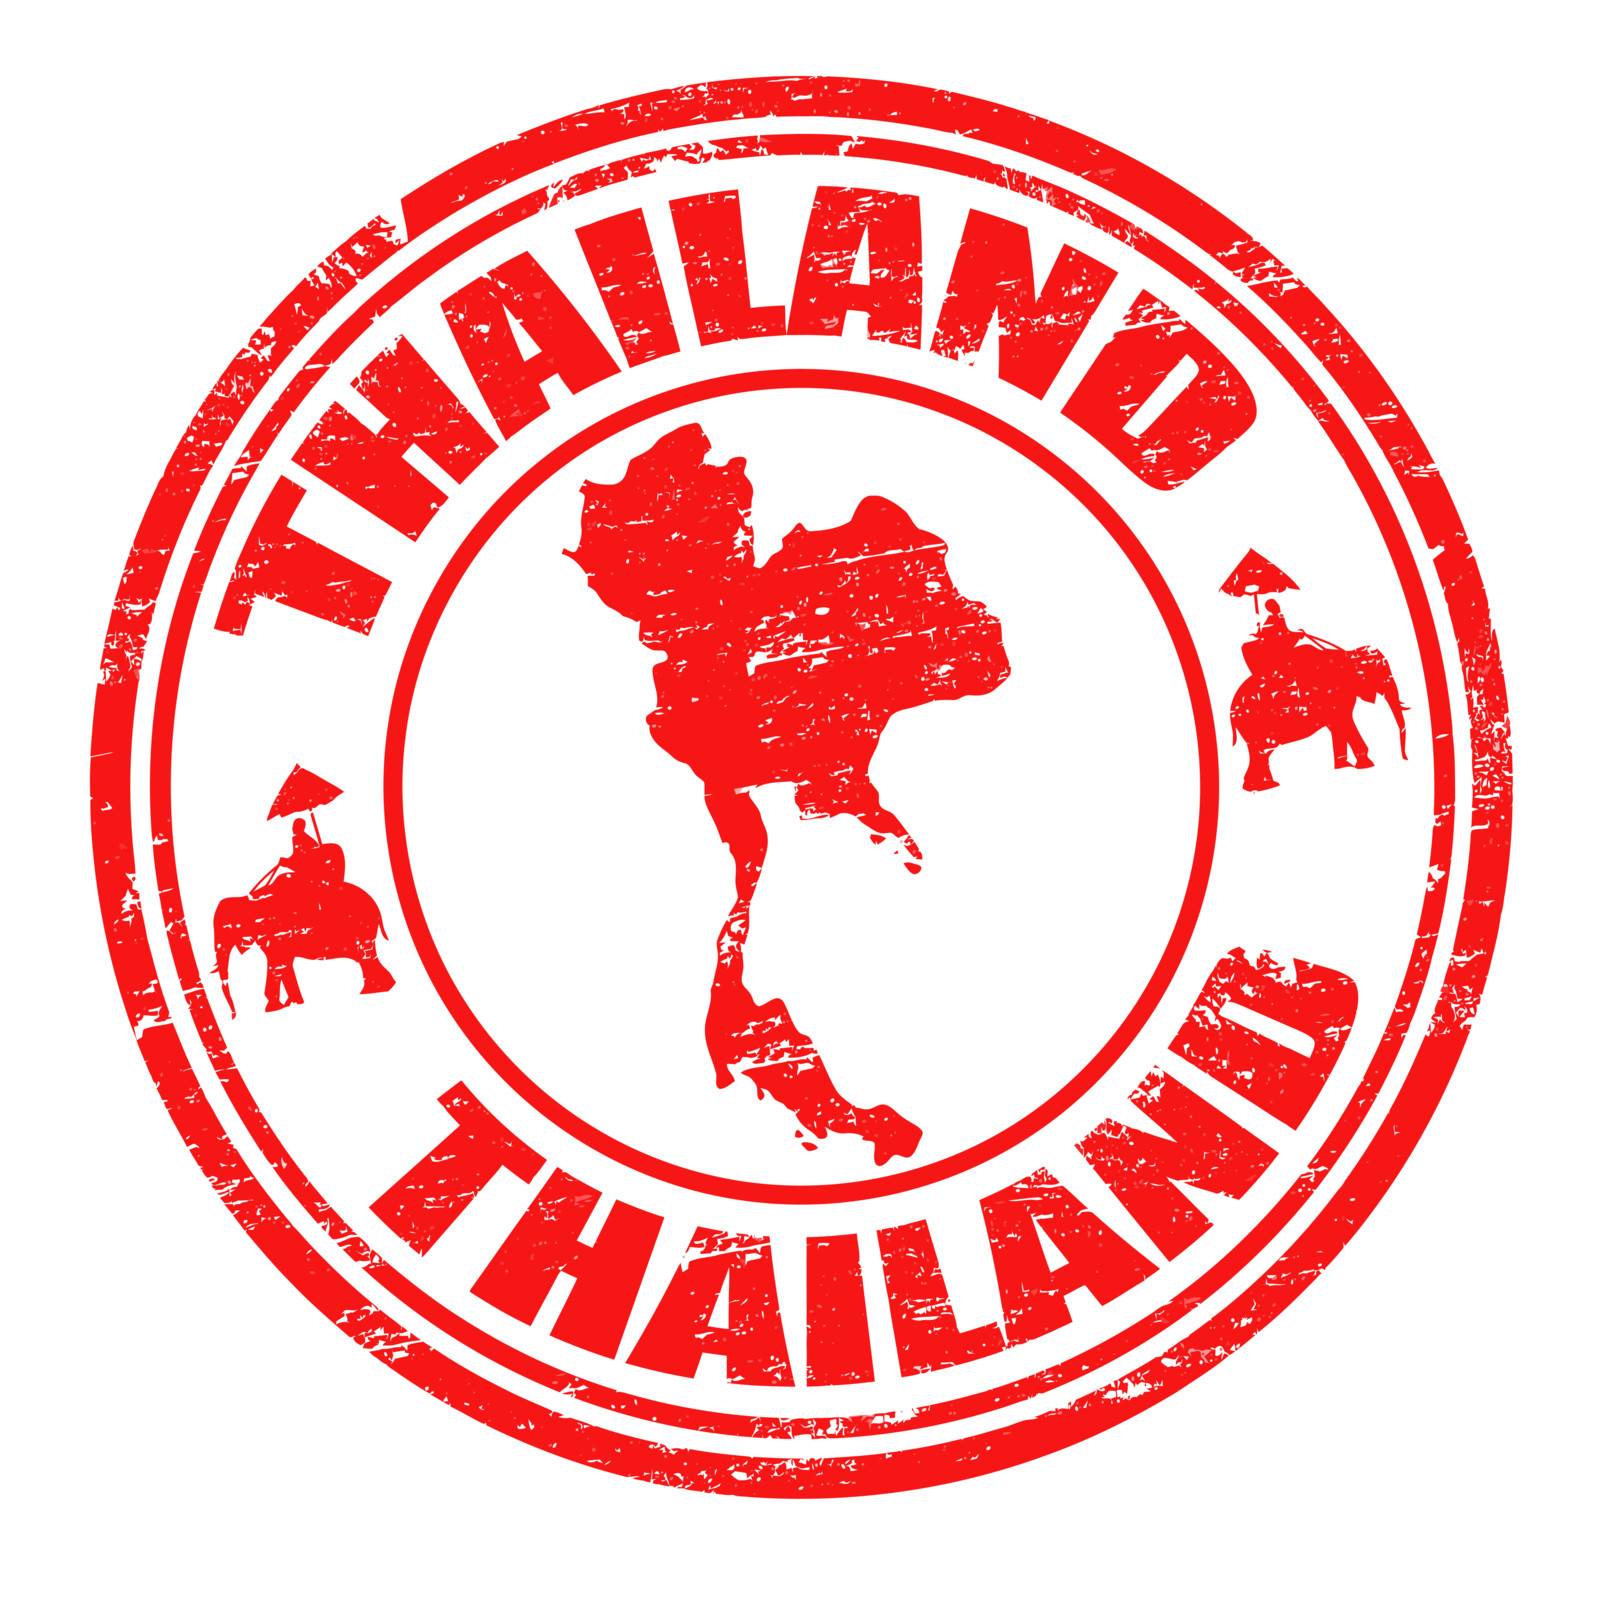 Grunge rubber stamp with map of Thailand  and the name Thailand written inside the stamp